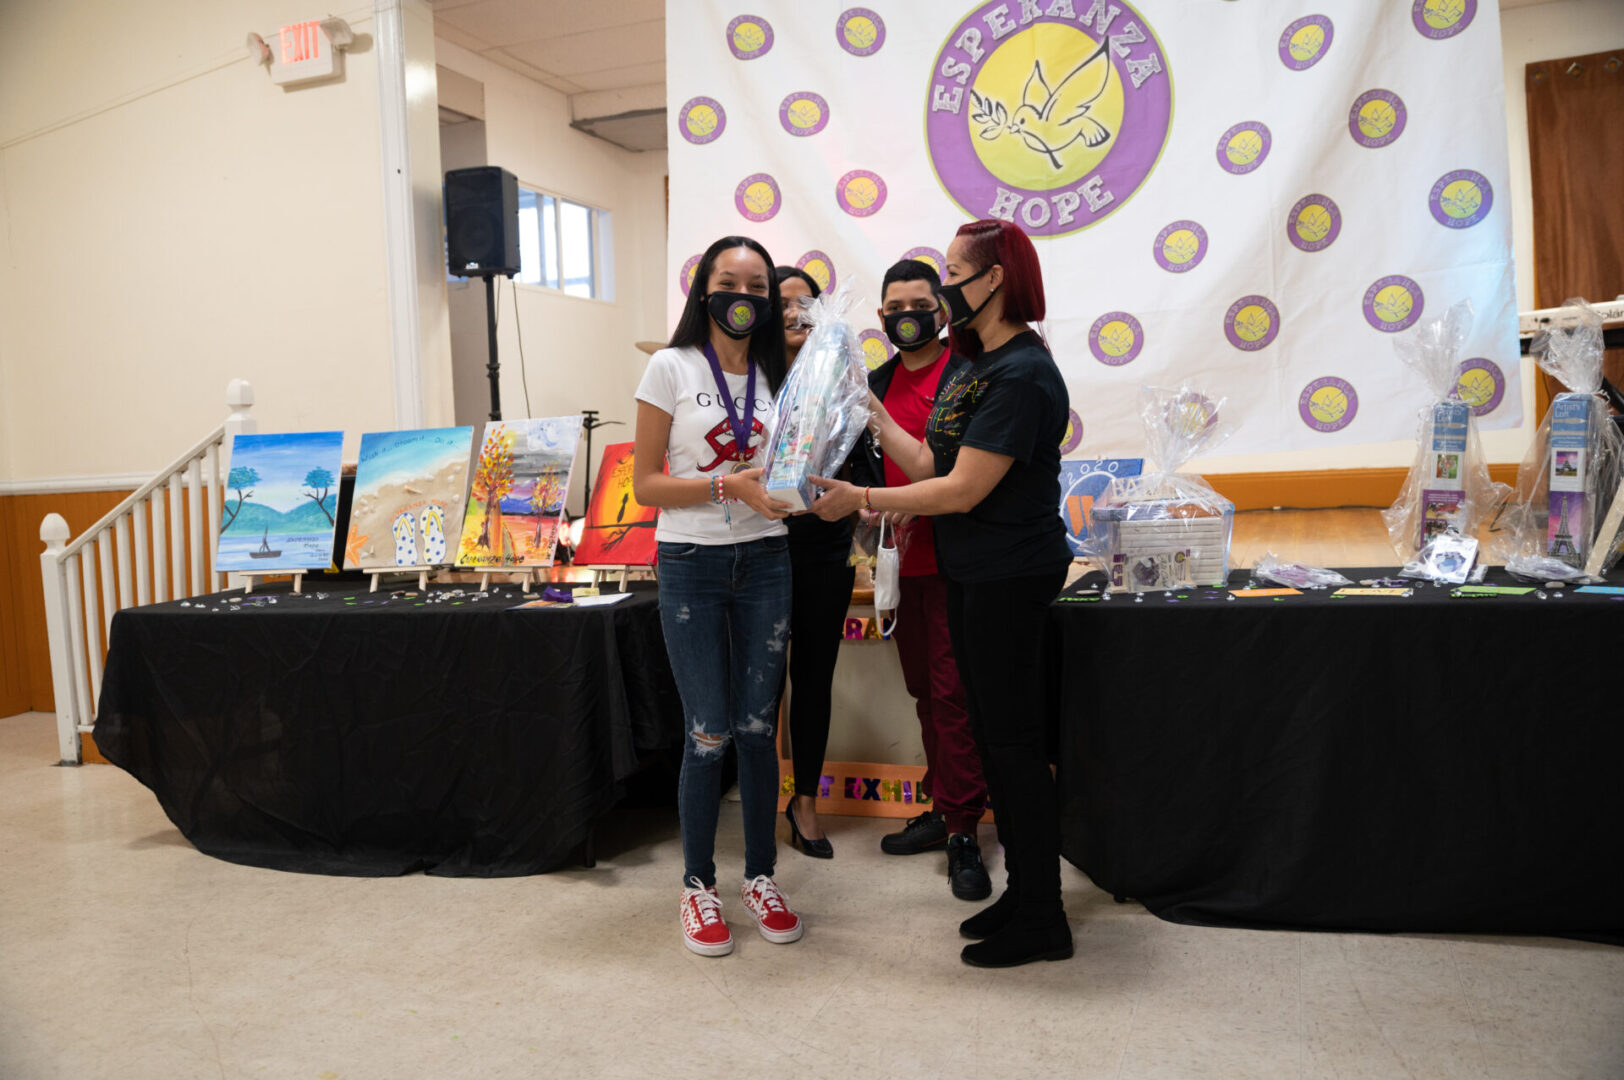 Another girl wearing a medal receiving a box of Artist’s Loft product